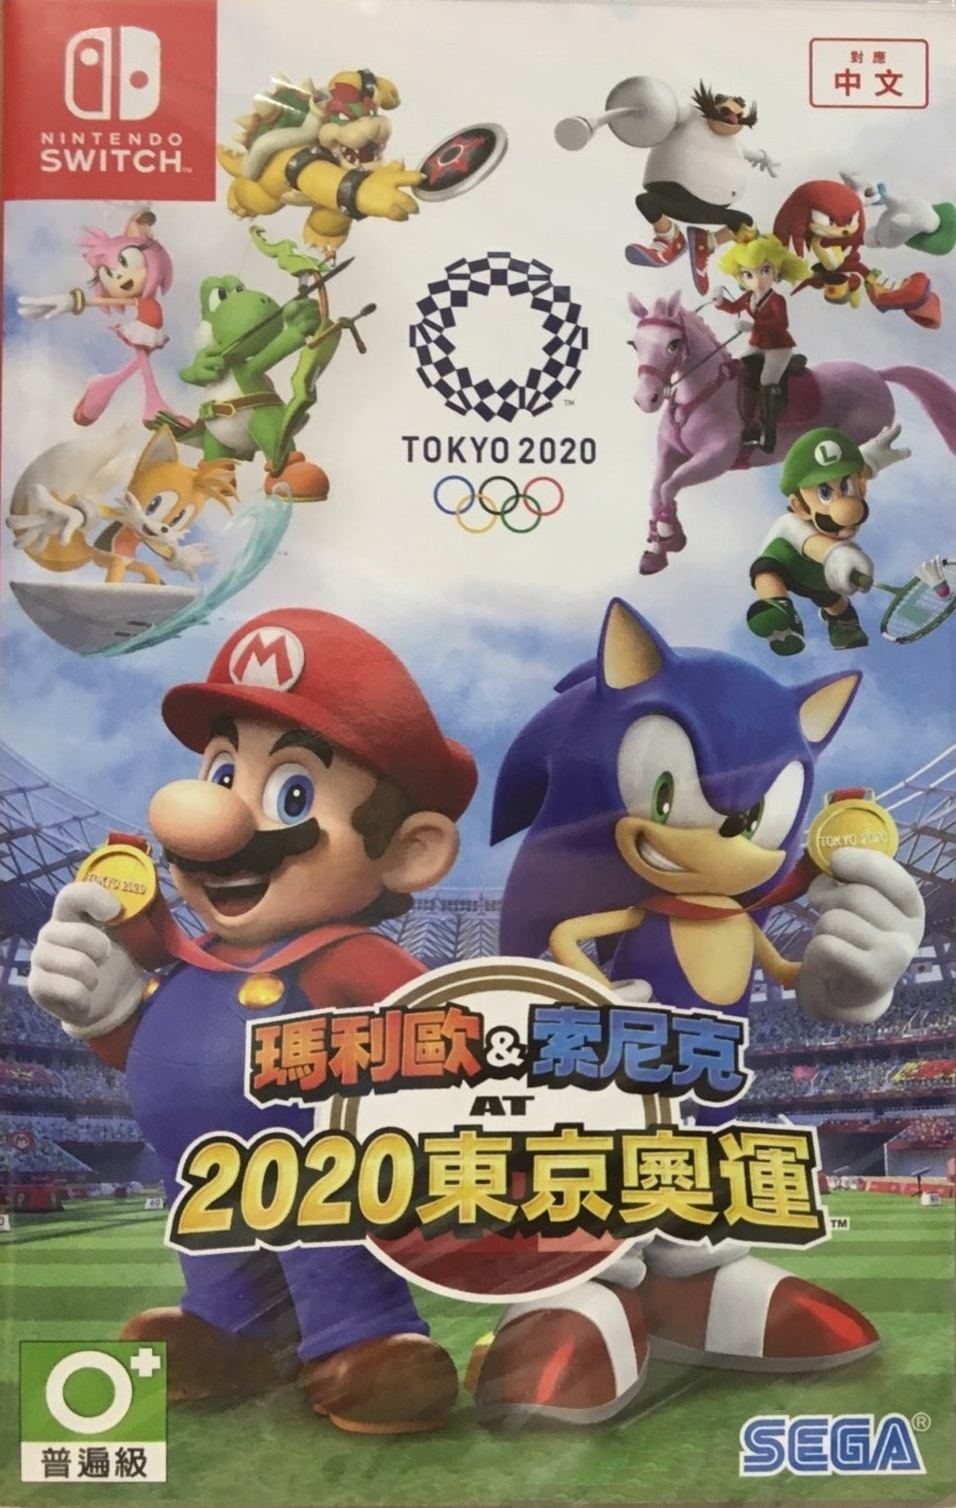 mario and sonic at the olympics switch